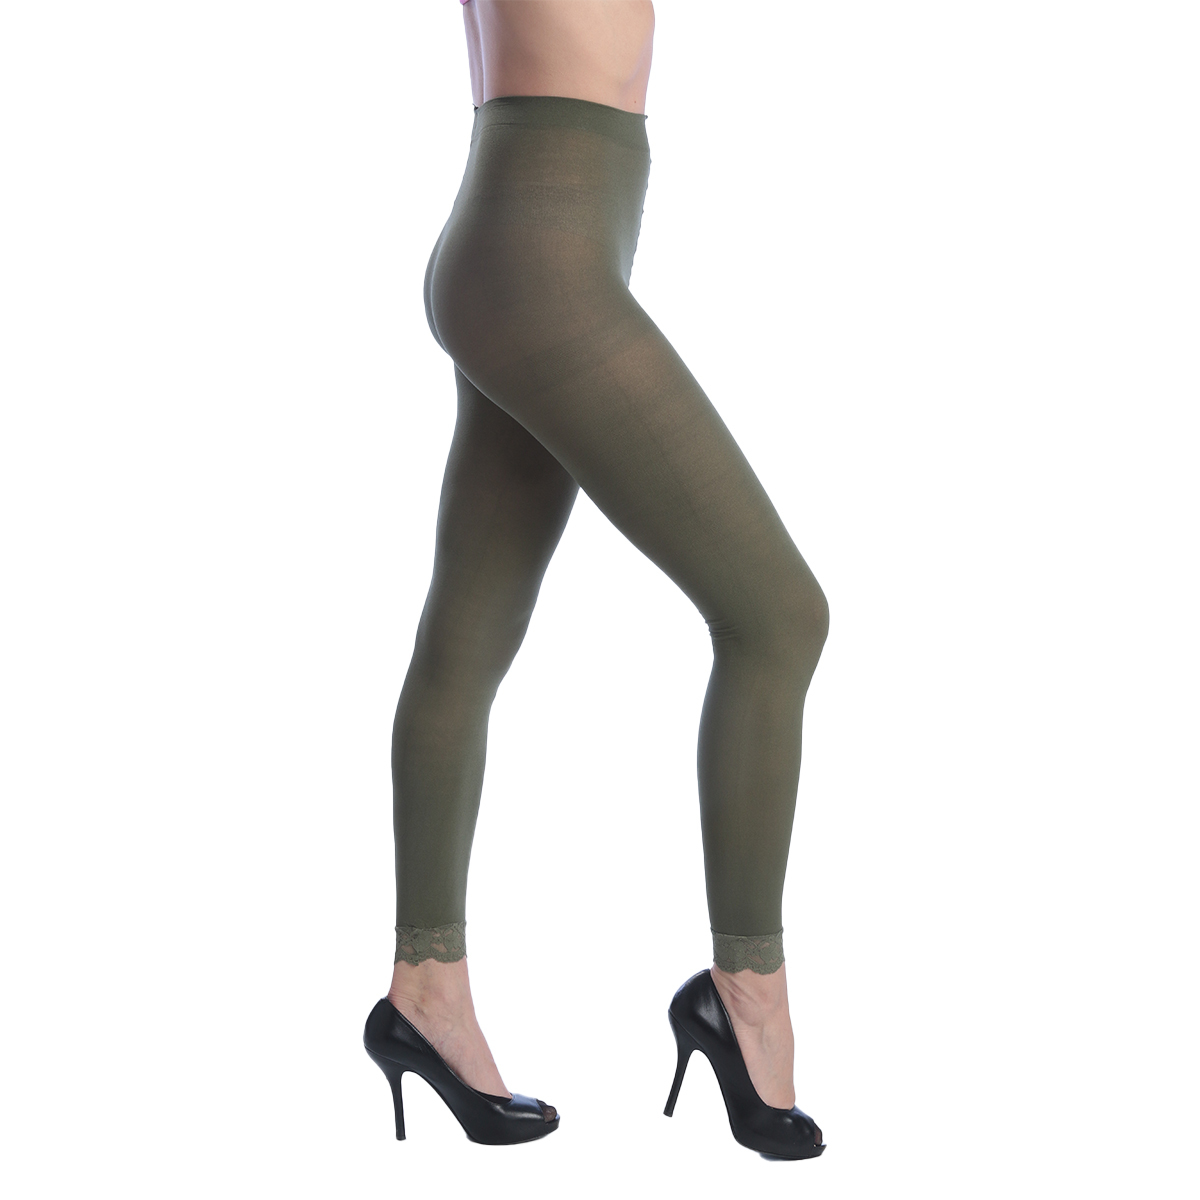 Women's Opaque Control Top Footless Lace Tights - Olive, Queen Size